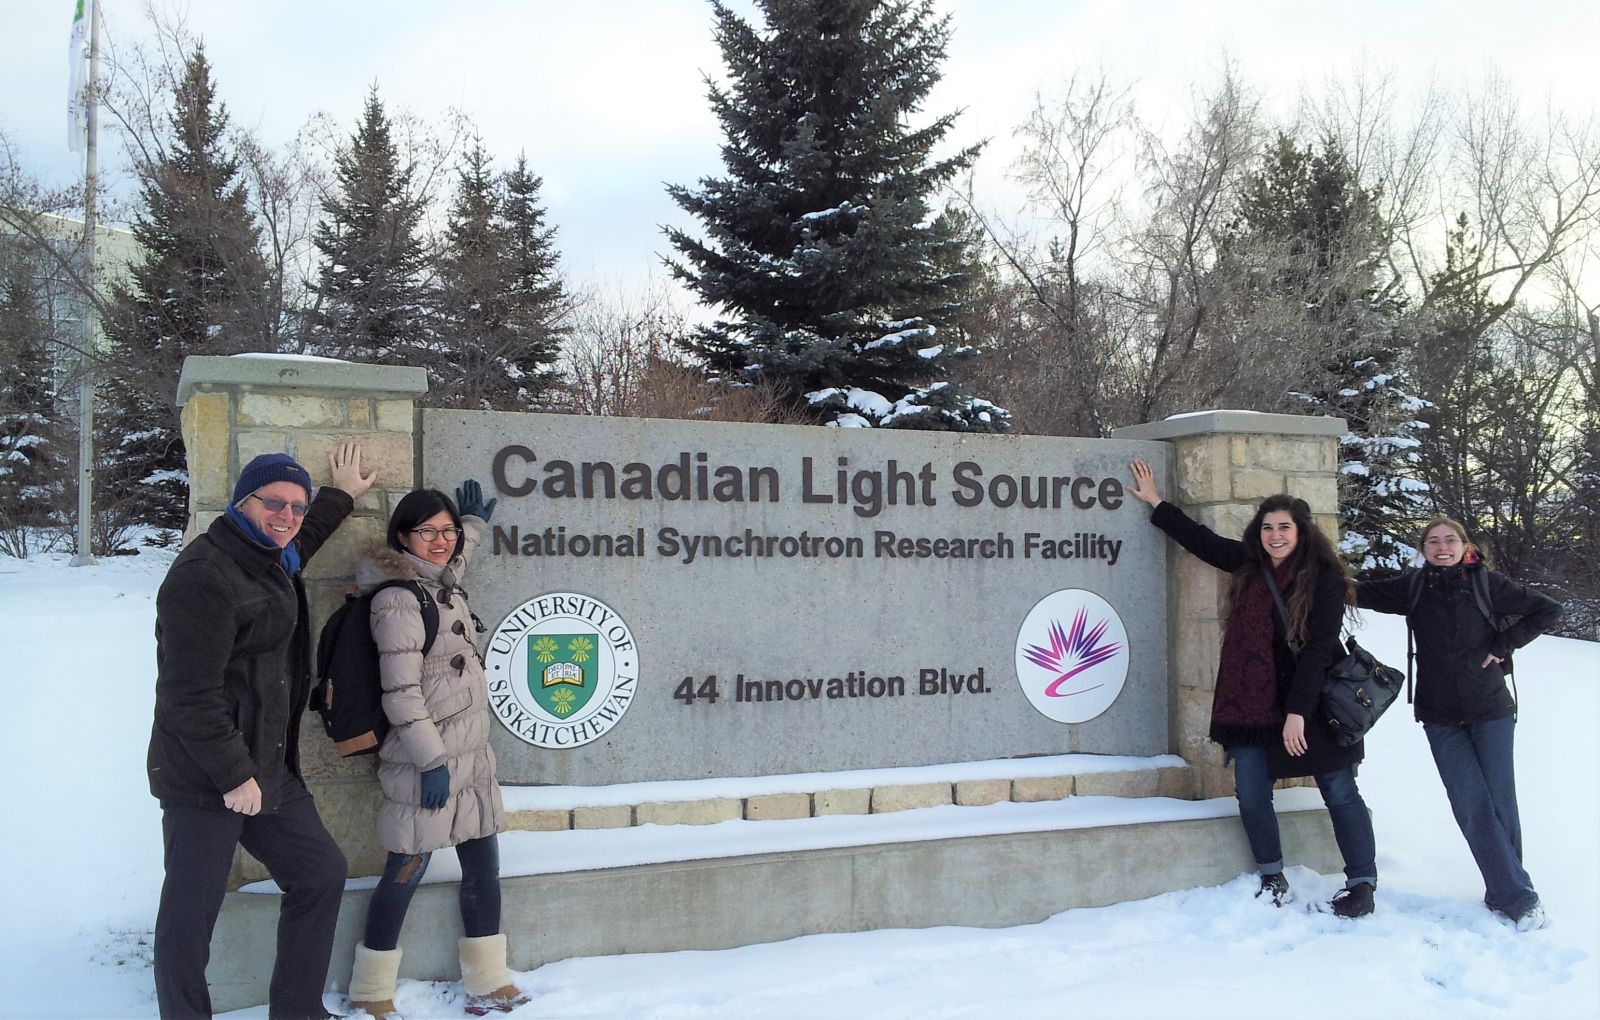 Research team members (left to right) Dr. Martin G. Scanlon, Dr. Xinyang Sun, Dr. Filiz Koksel and Dr. Reine-Marie Guillermic pose outside next to the Canadian Light Source sign.